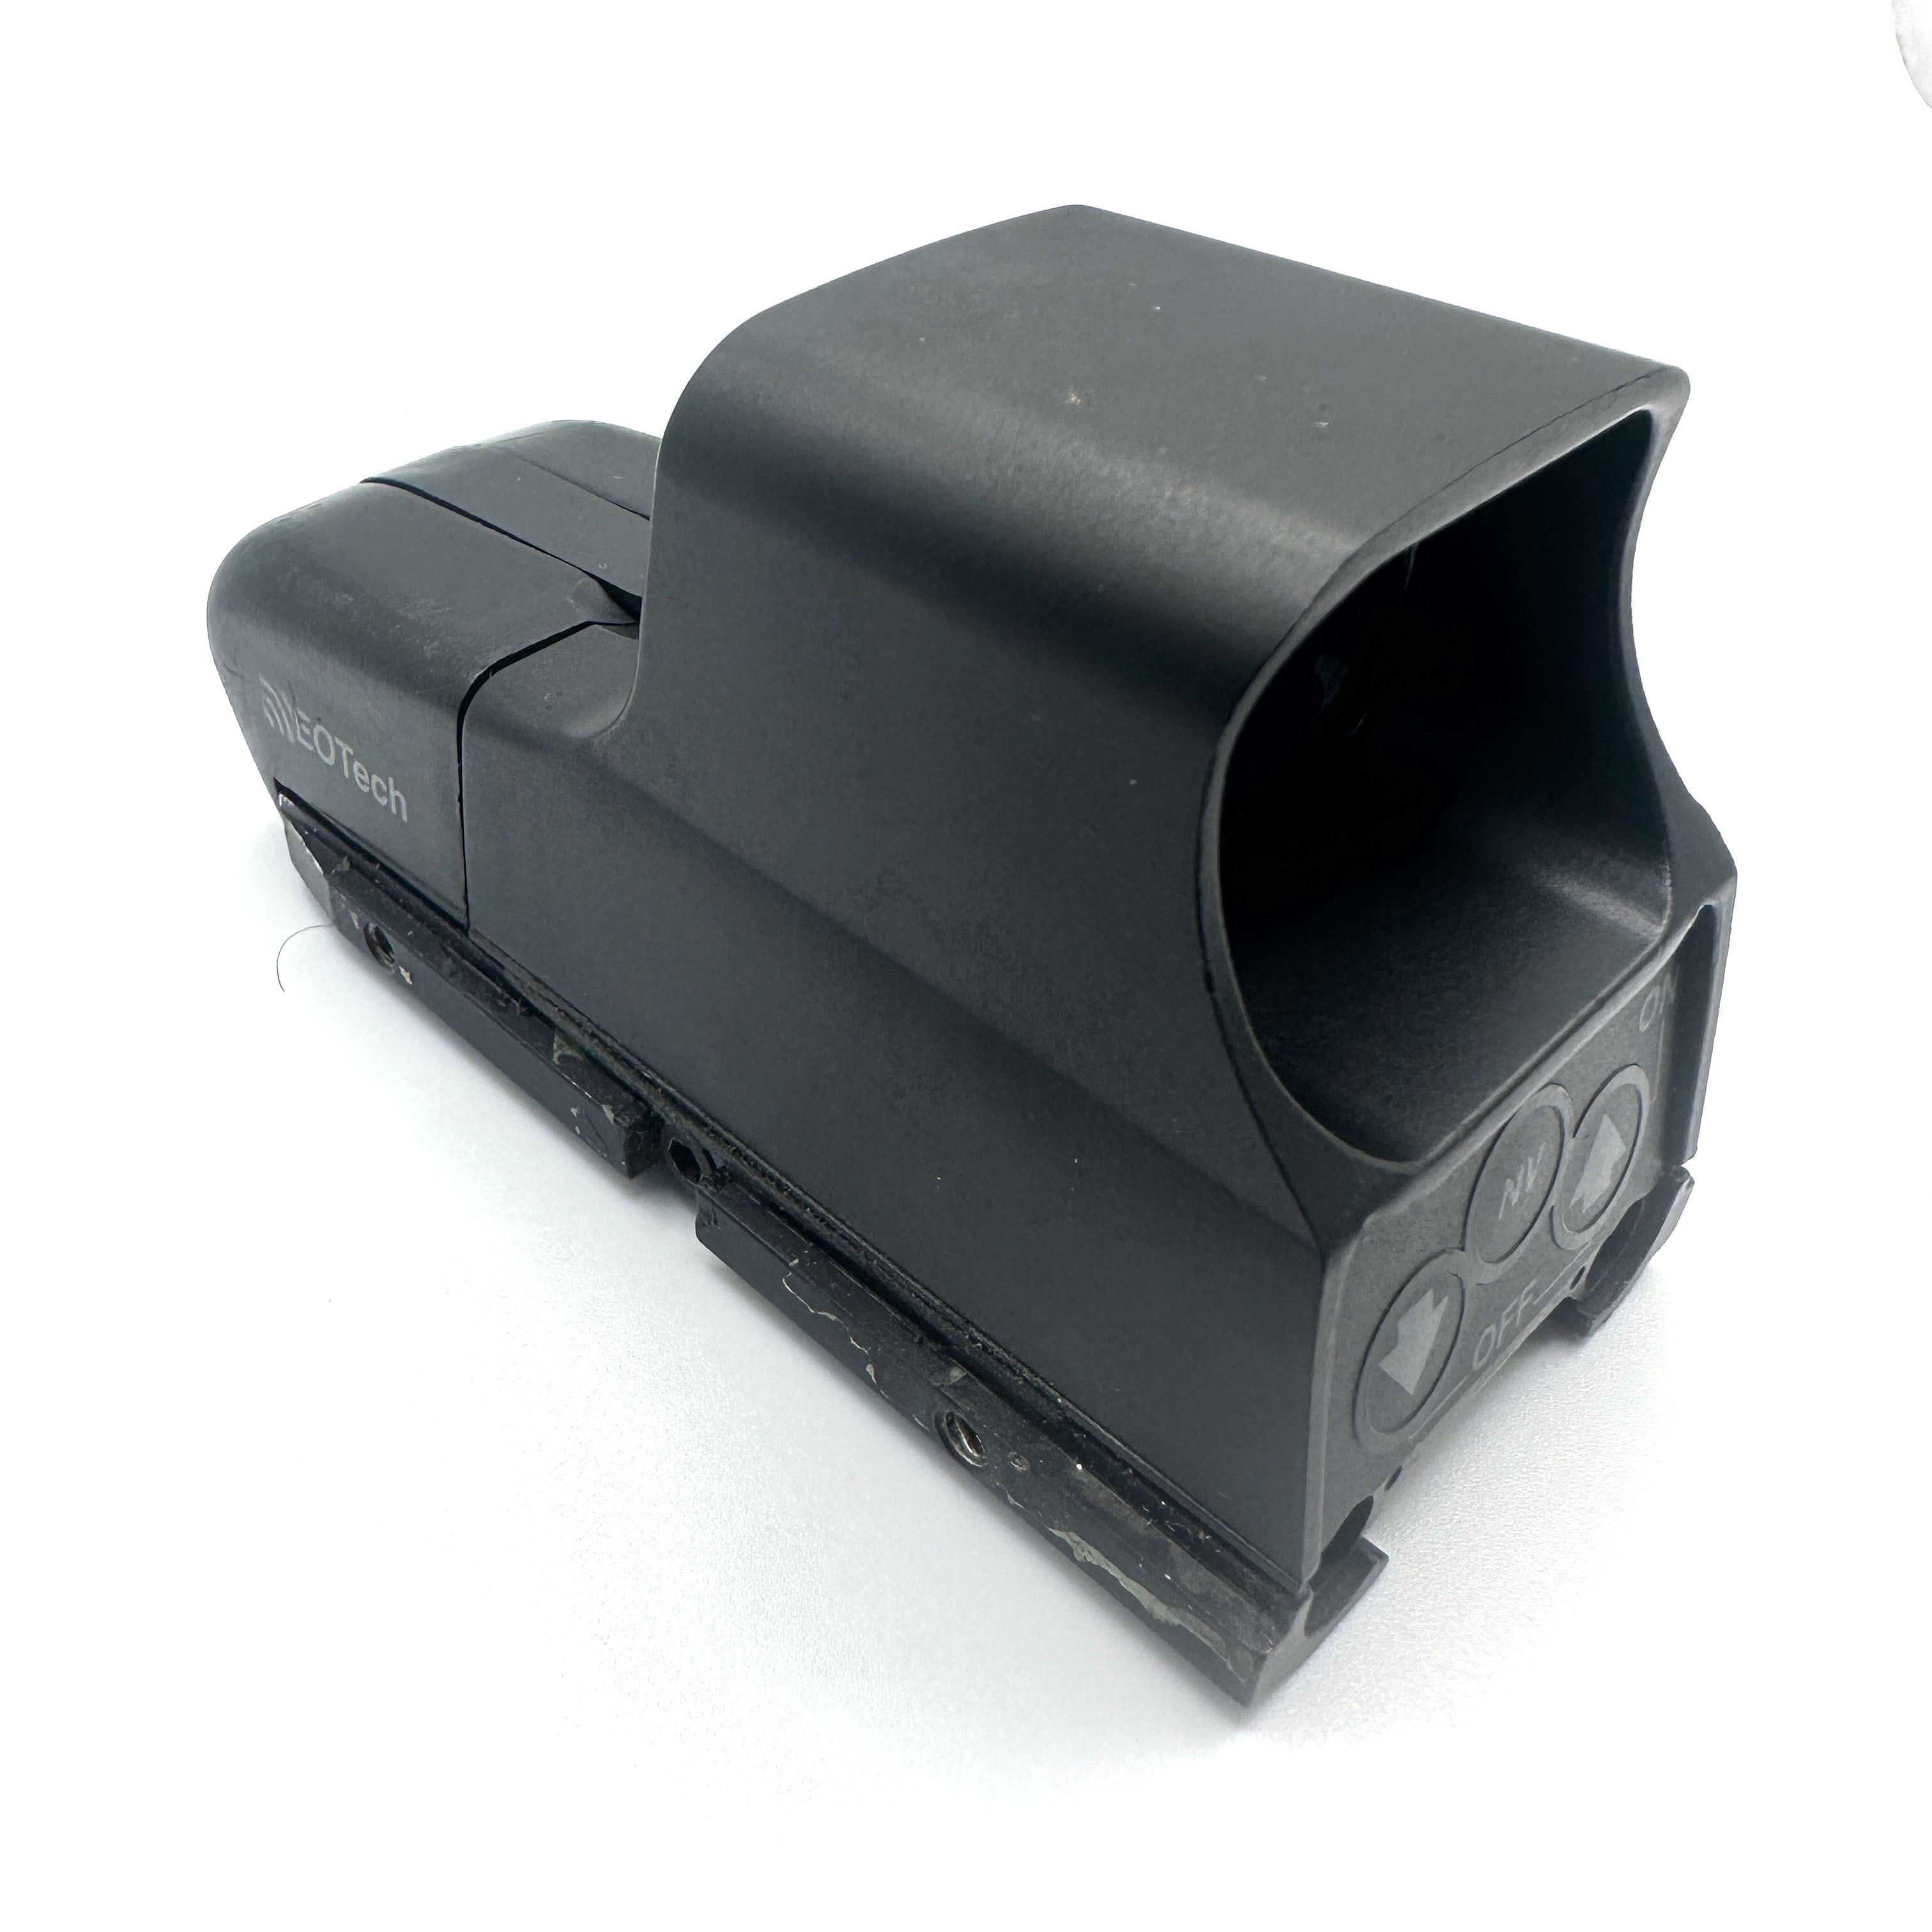 Genuine Eotech 551 Holographic Optical Sight - RPI Supplies